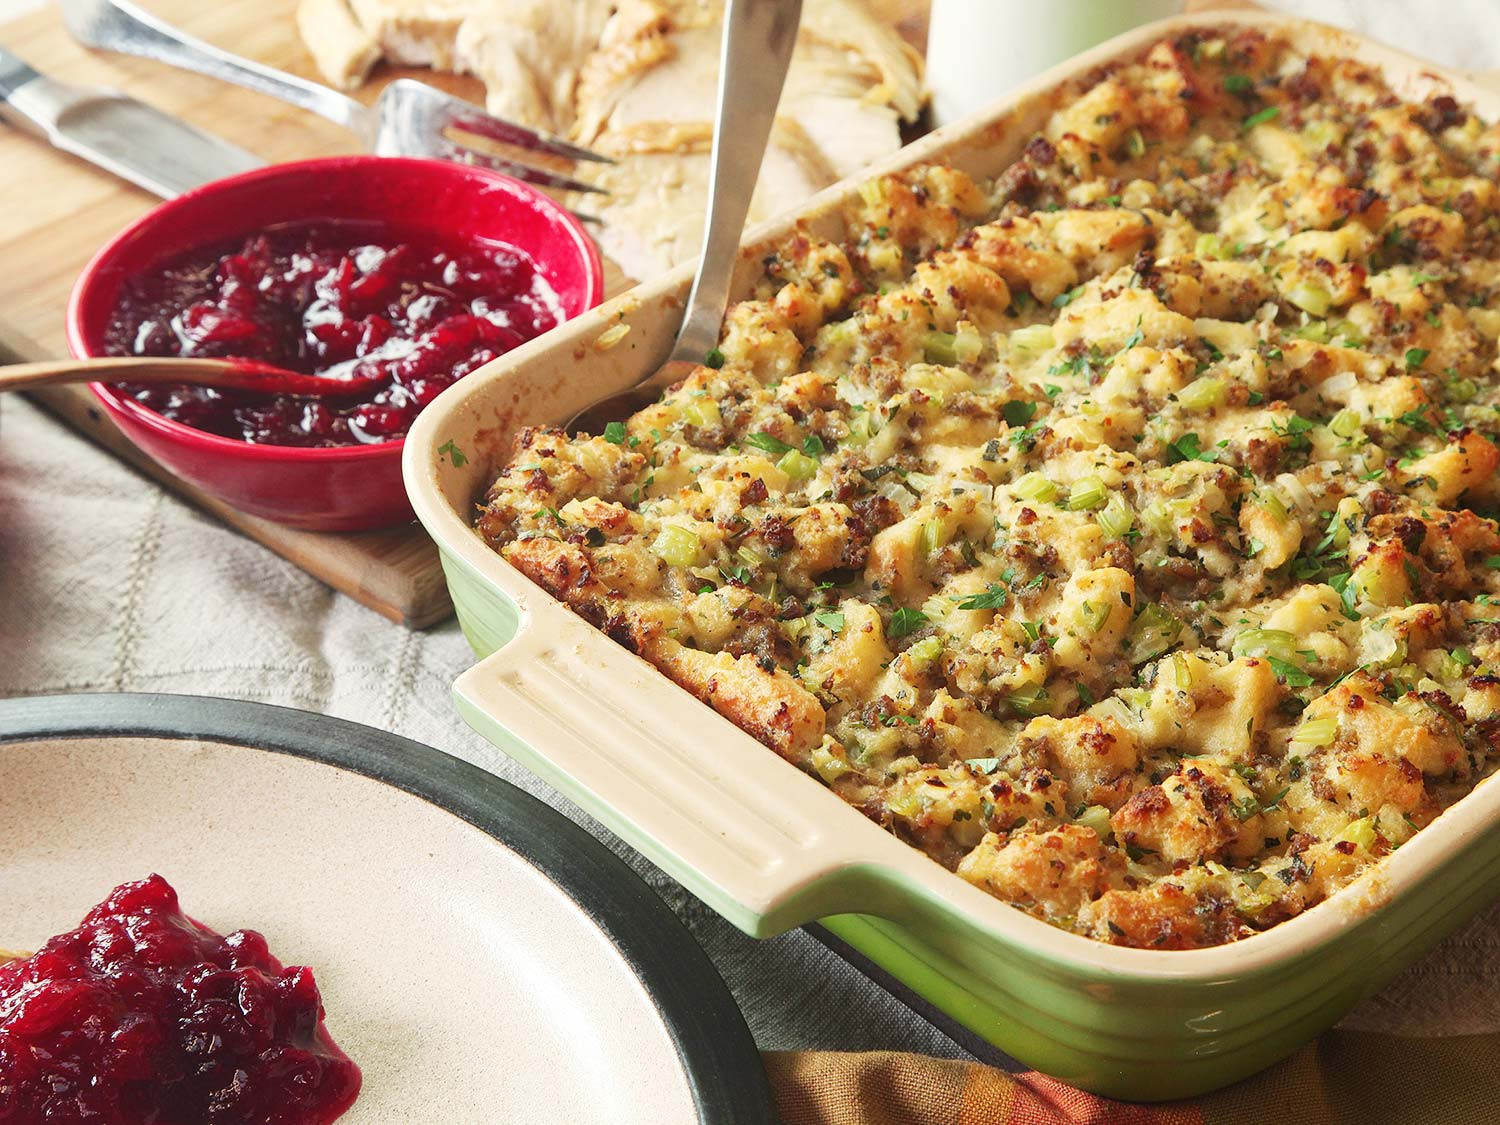 Thanksgiving Turkey Recipe With Stuffing
 Classic Sage and Sausage Stuffing or Dressing Recipe